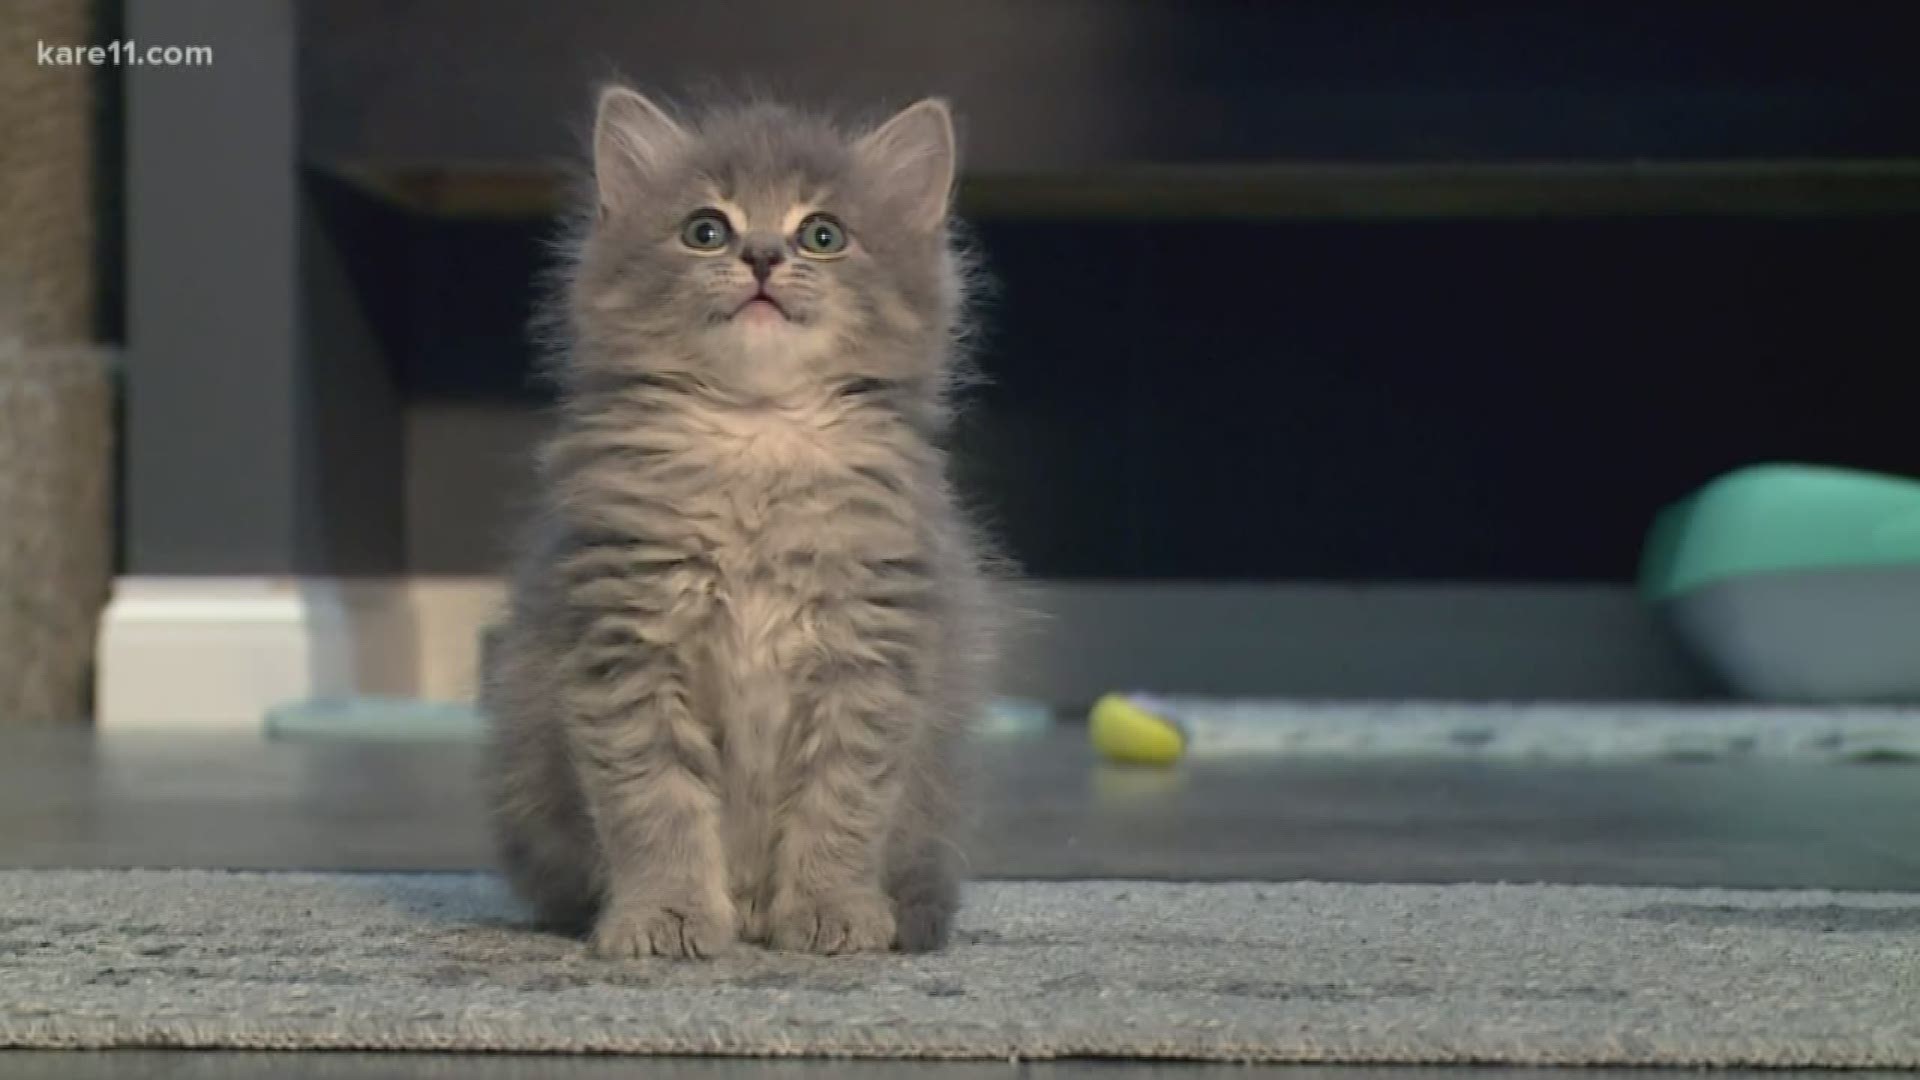 There are fewer things cuter than itty bitty kitties. And, this is a story about those bitty kitties who need your help. They are the cats of the Bitty Kitty Brigade